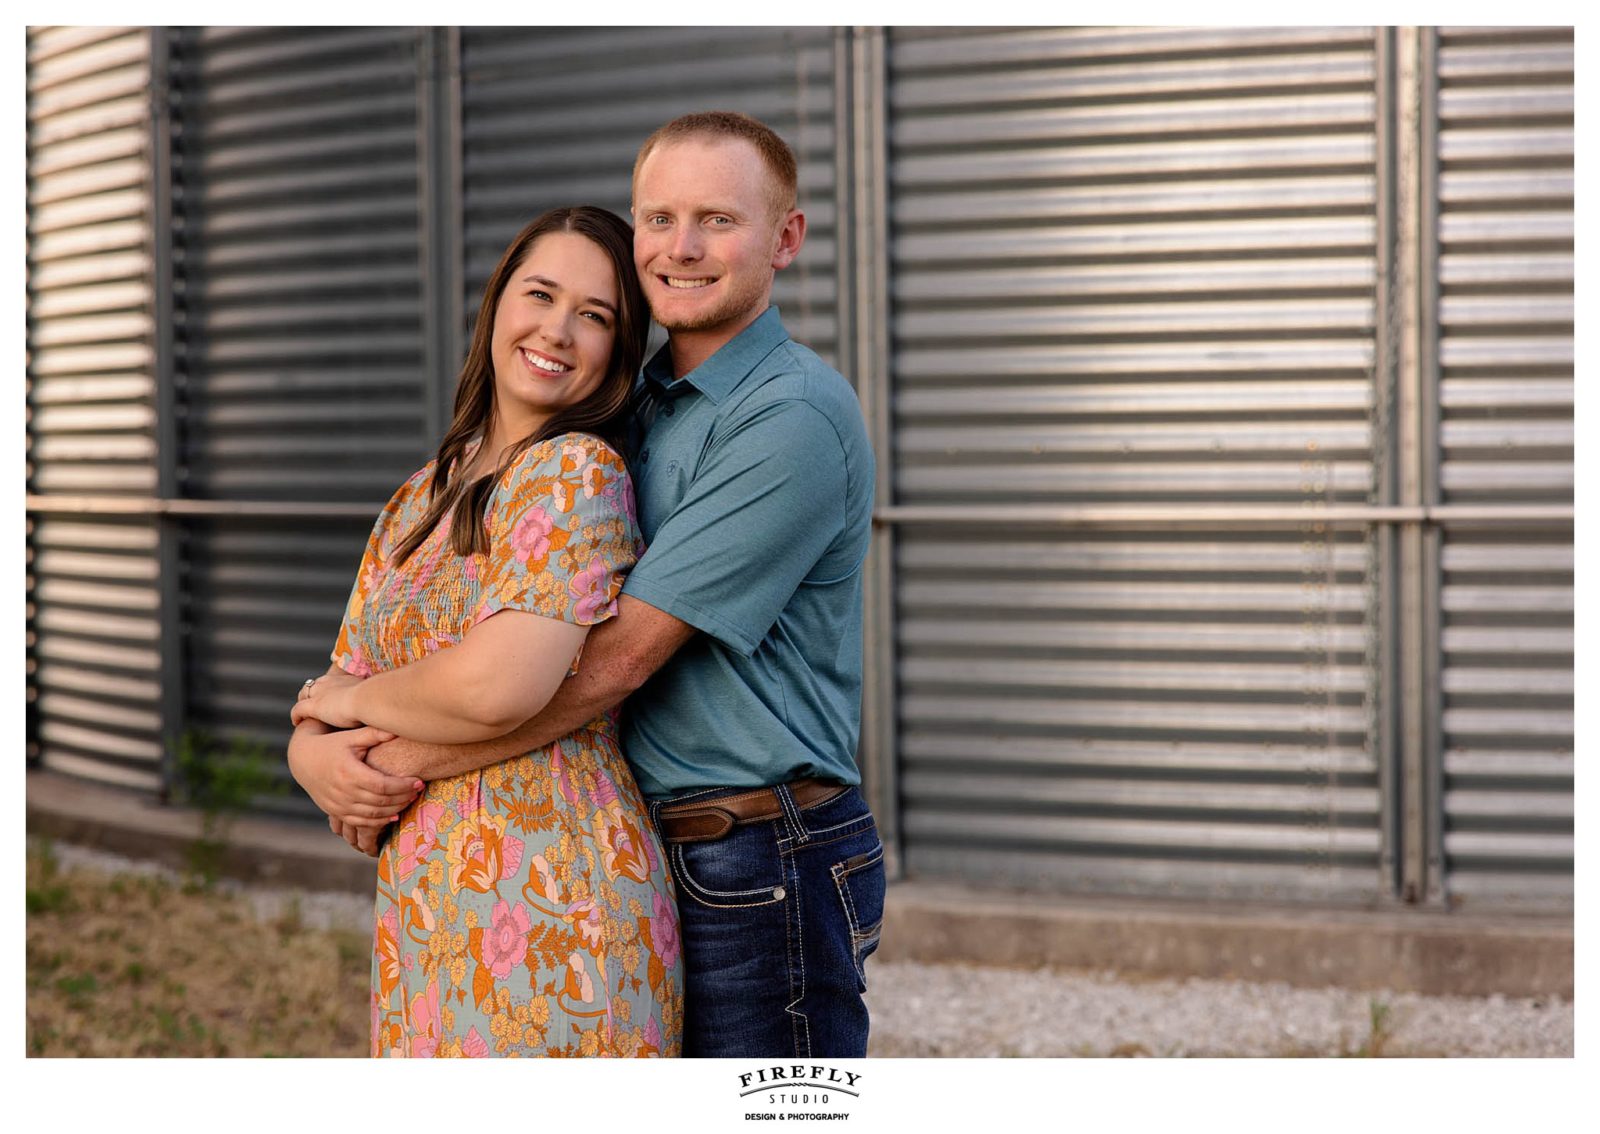 Madeline & Joe's engagement session on the Ward farm in Rushville Illinois